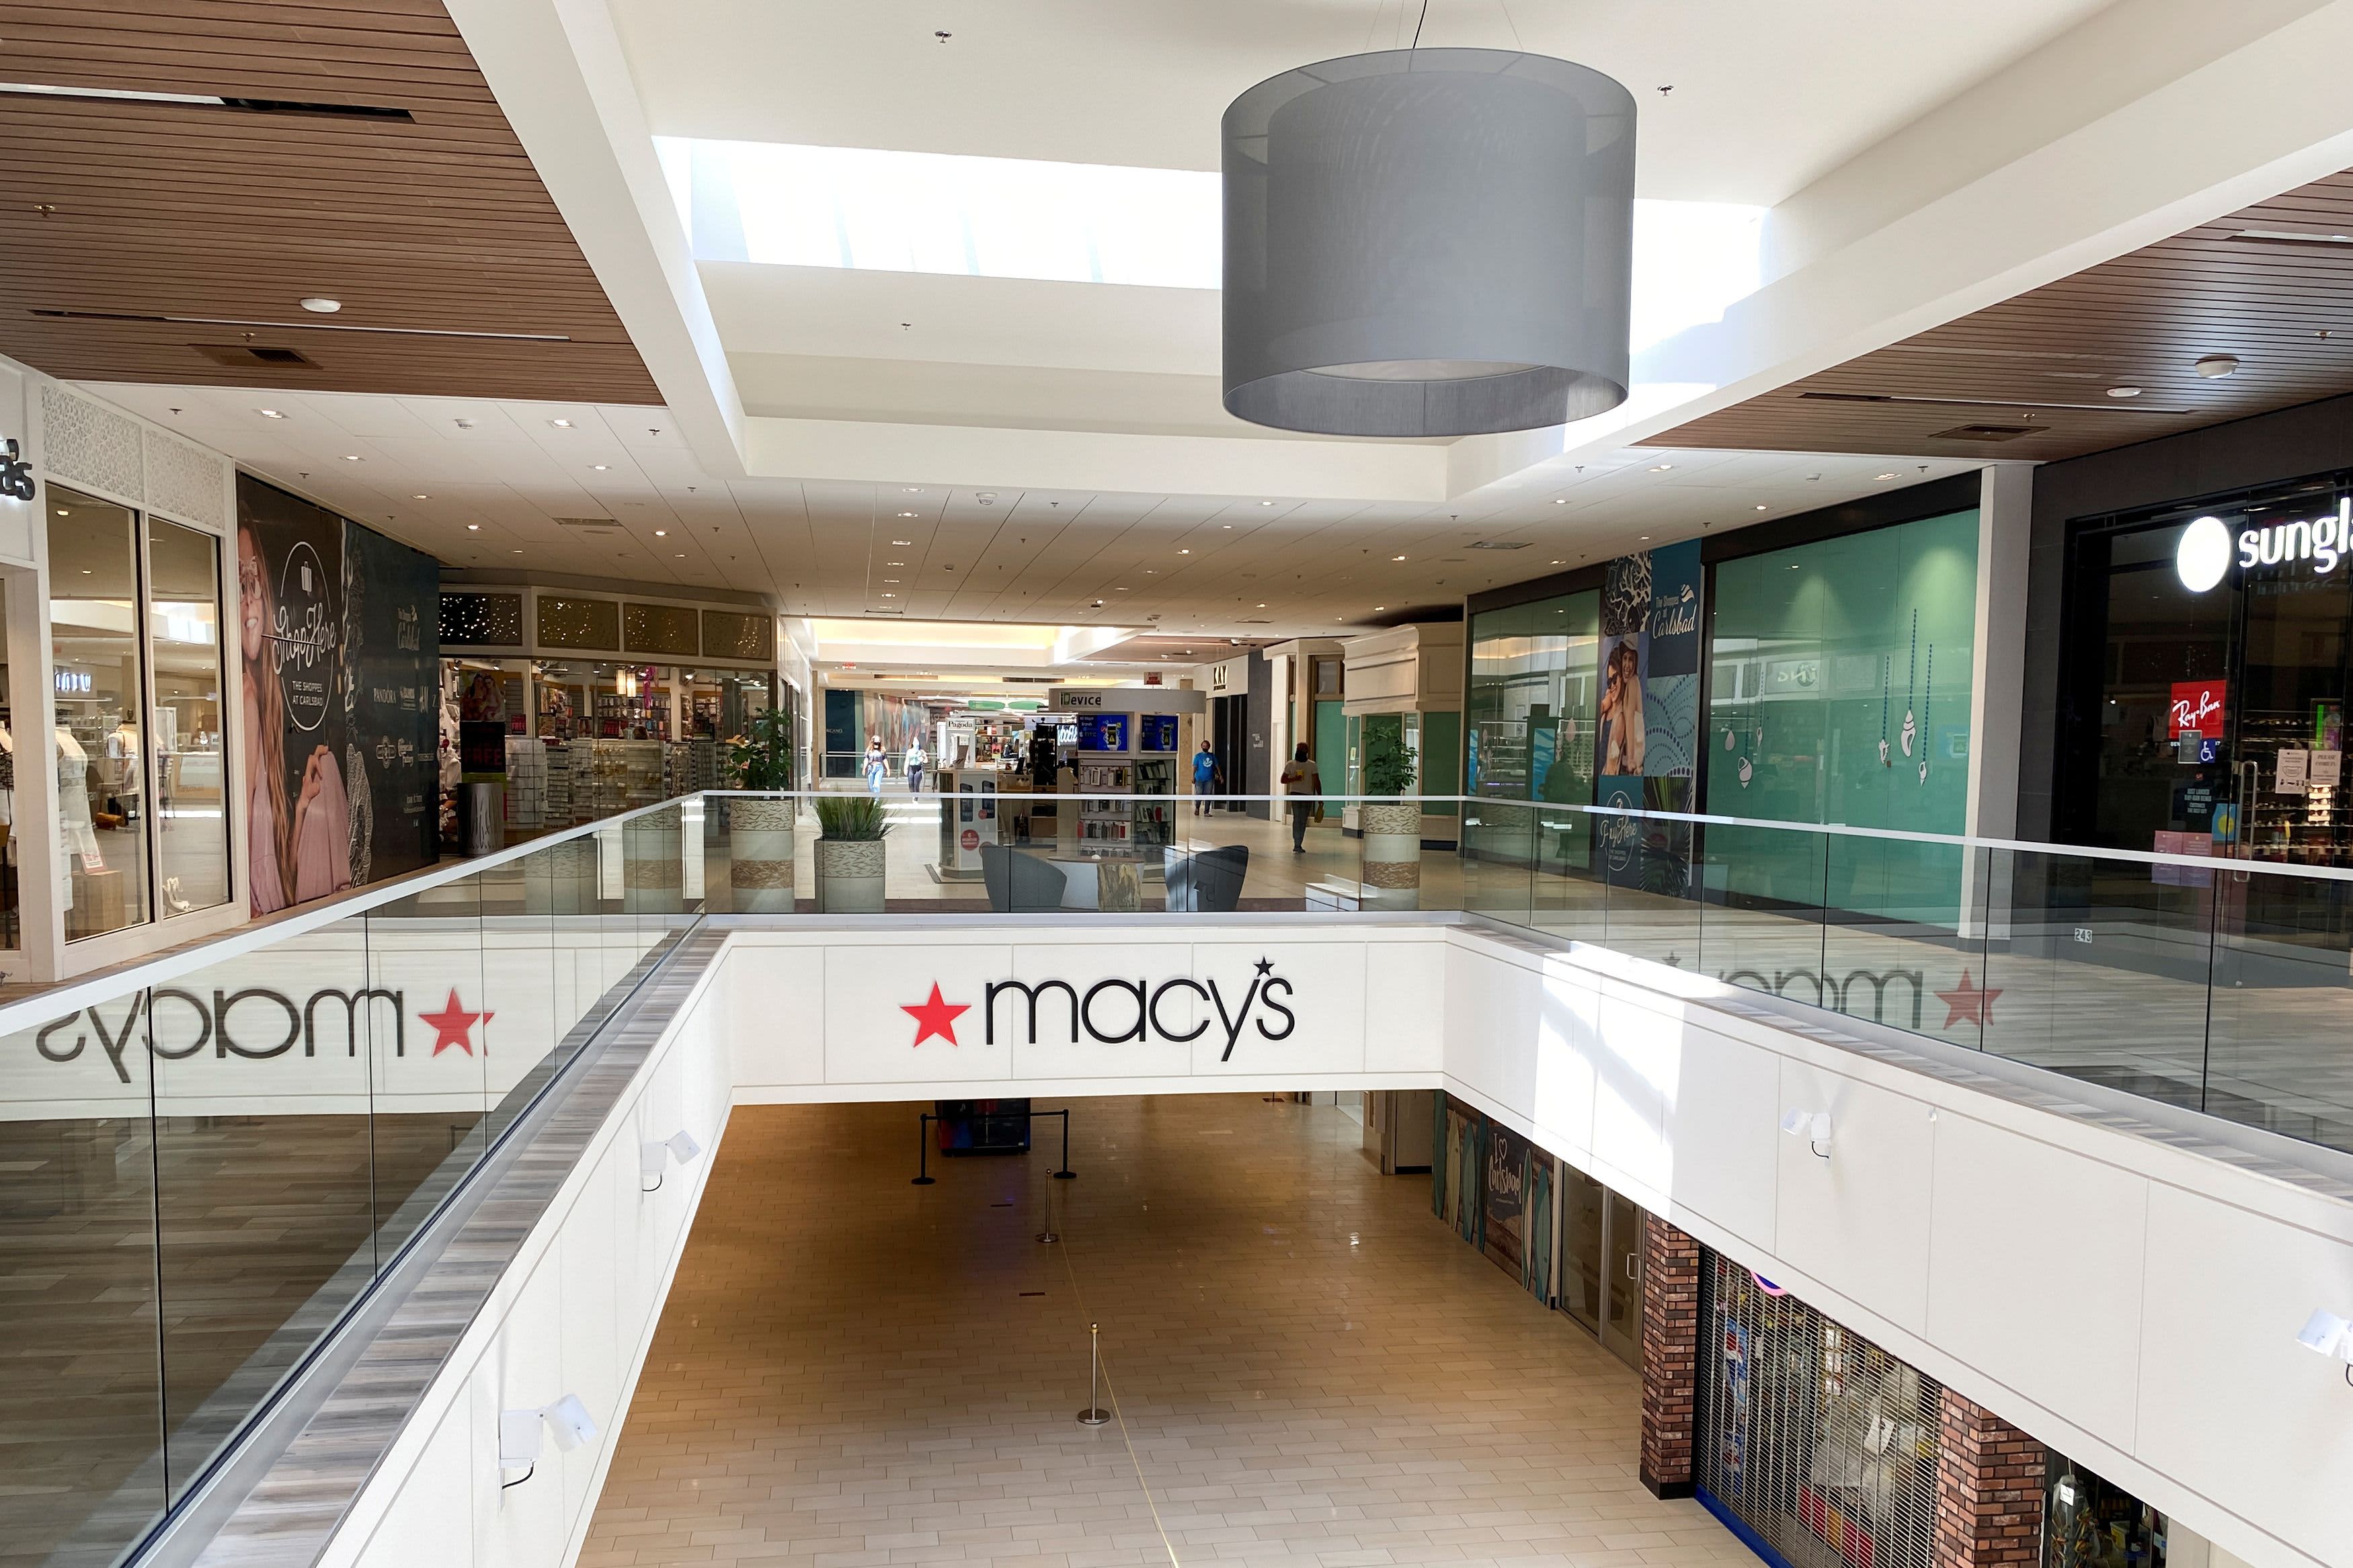 25% of U.S. malls are set to shut within 5 years. What comes next?